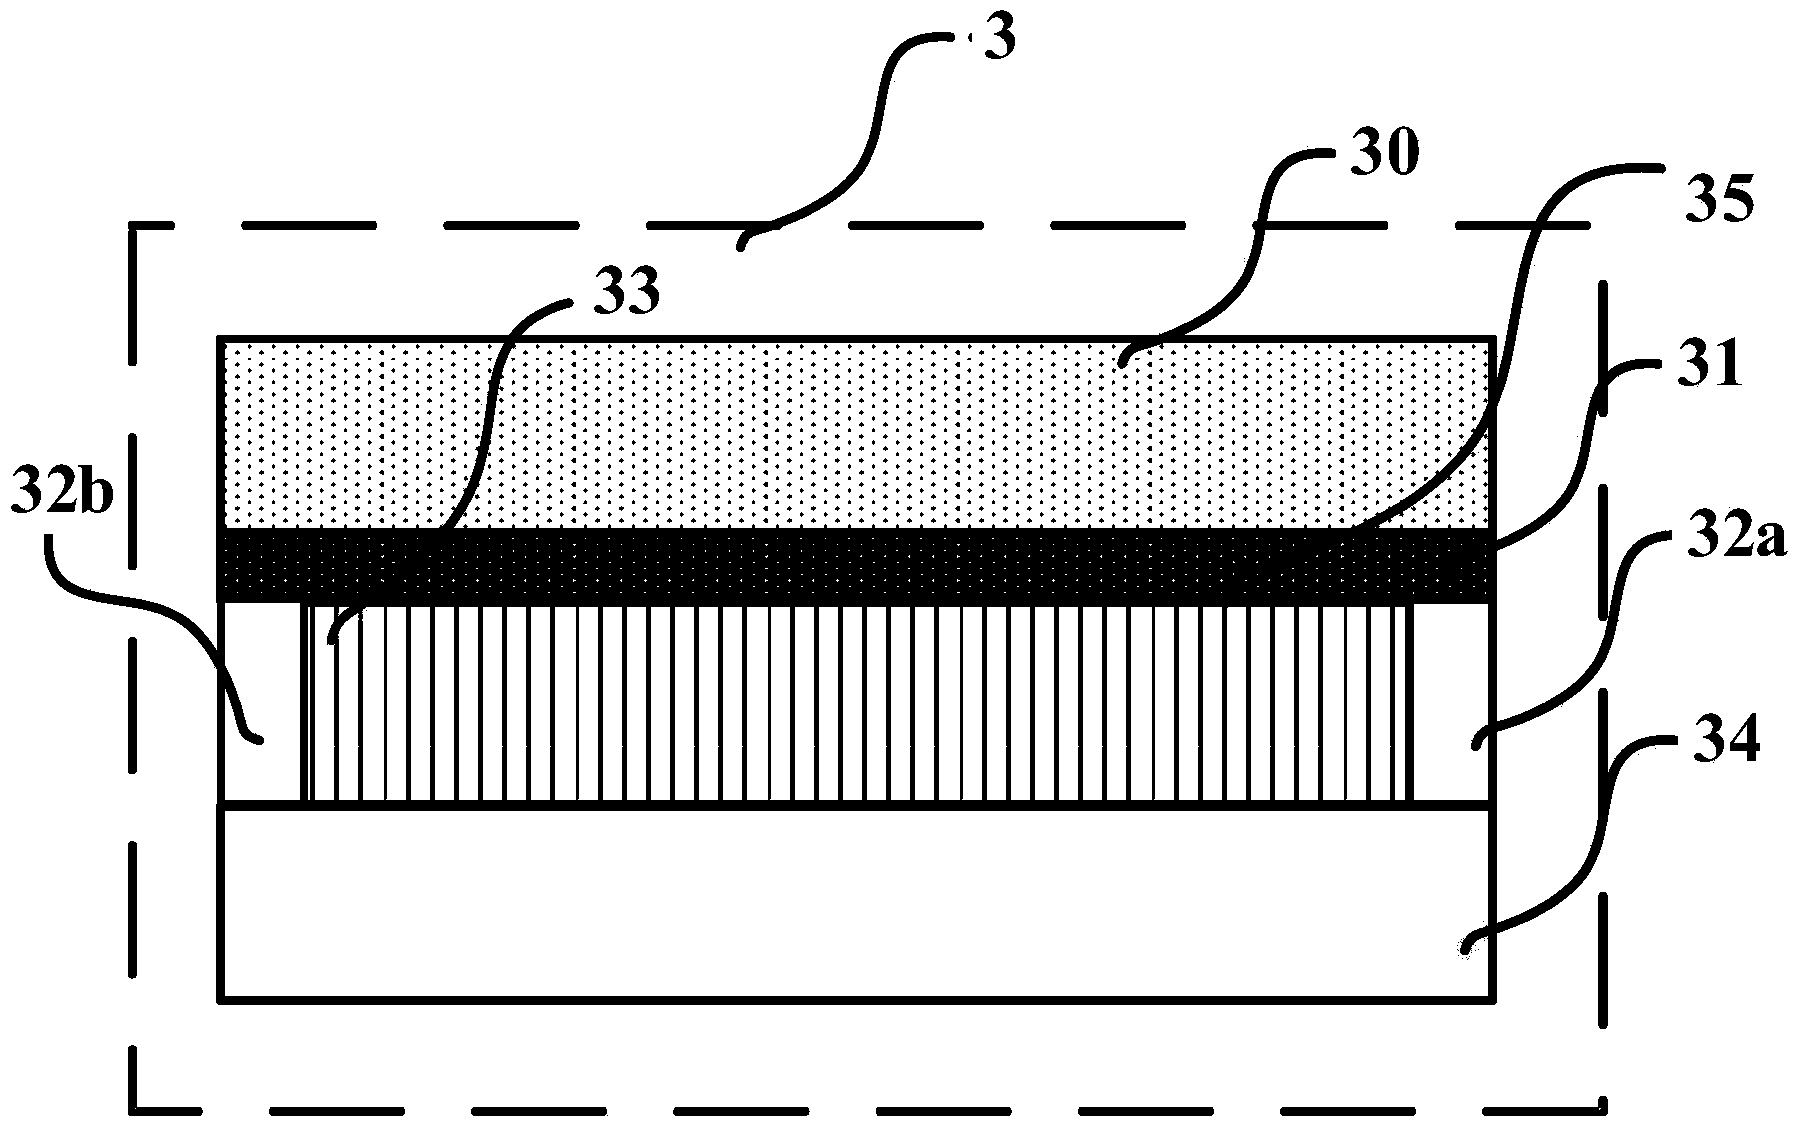 Radio-frequency micro-capacitance fingerprint acquisition chip and method